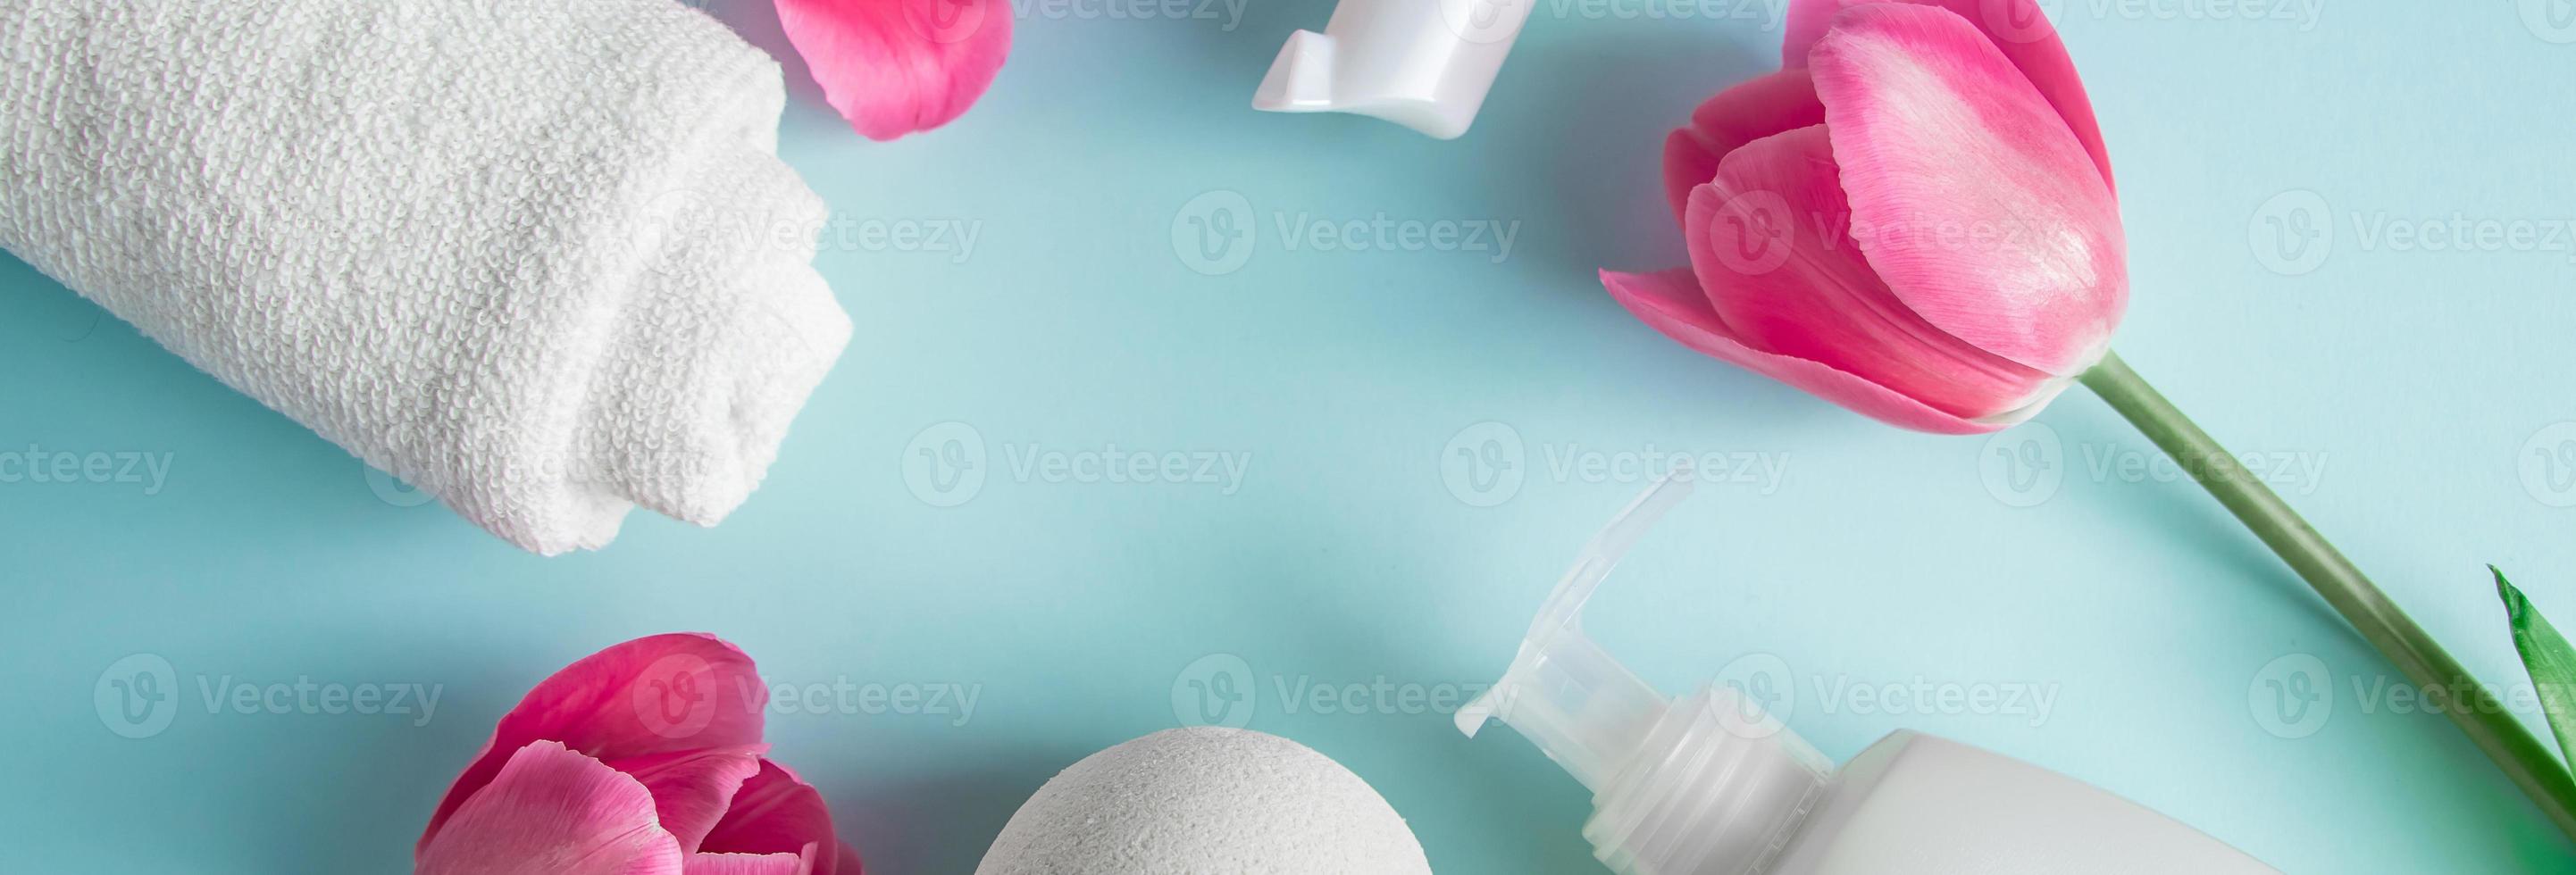 Skin care products on a blue background. photo